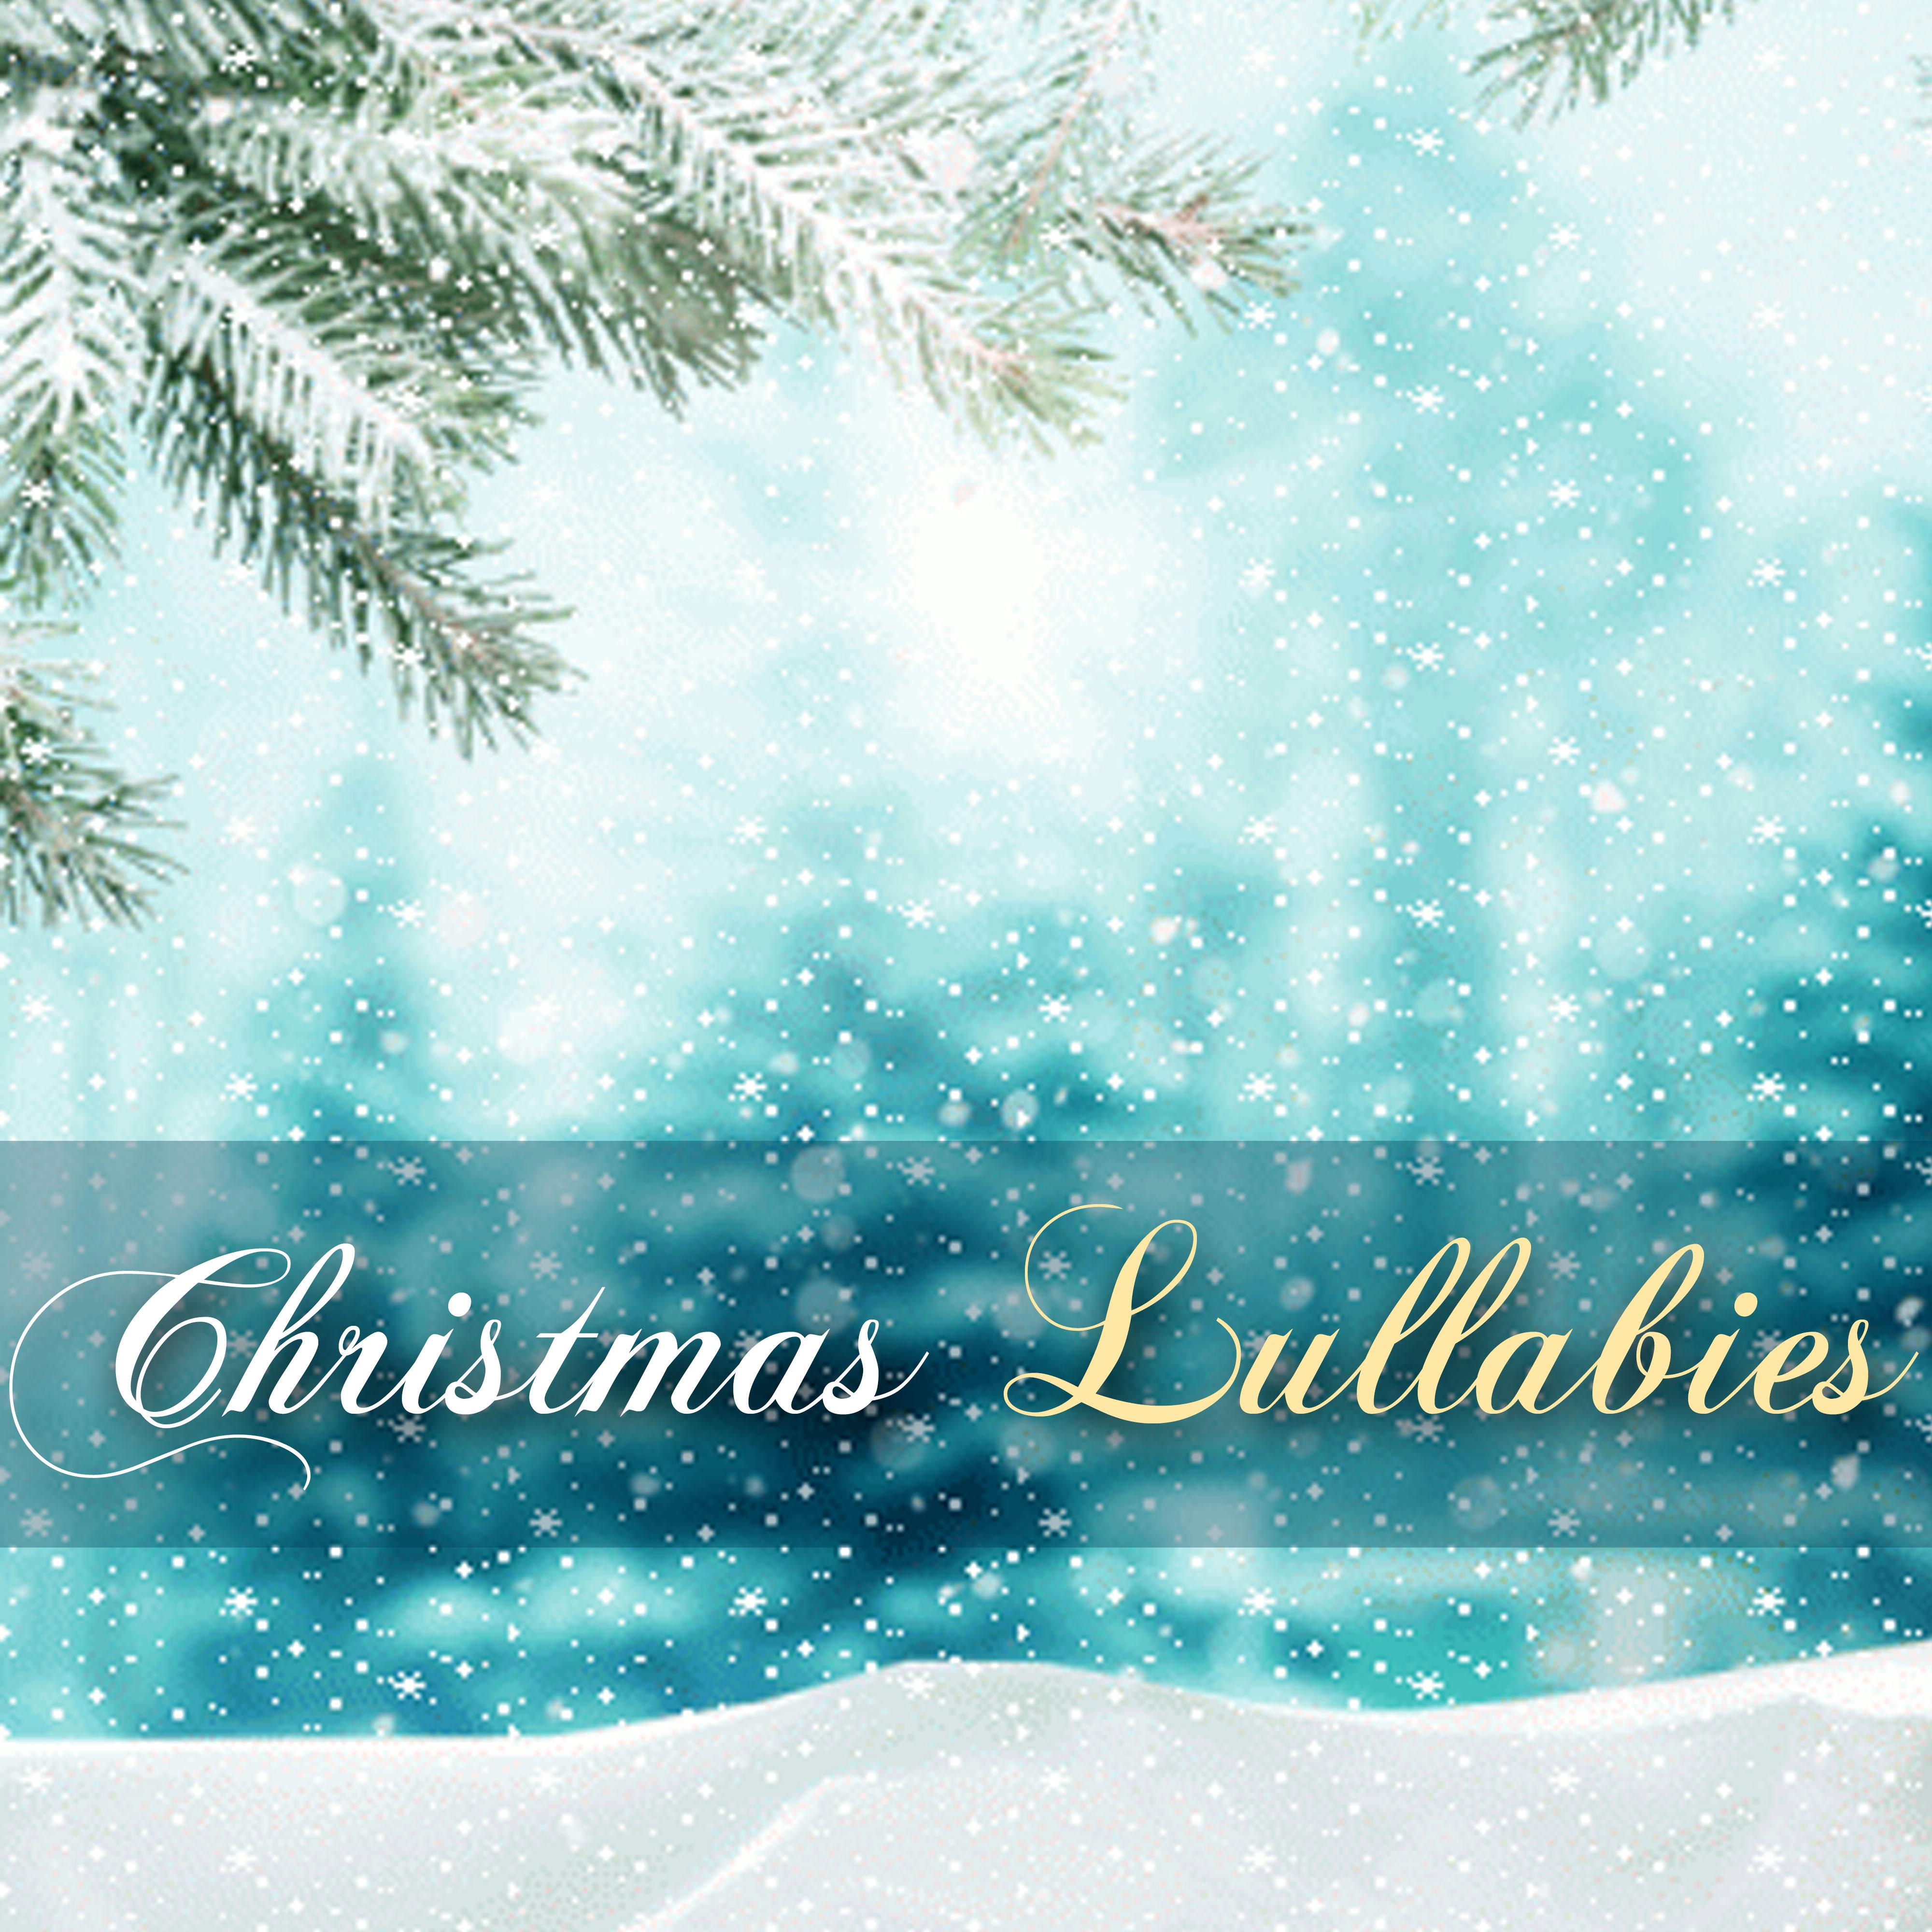 Christmas Lullabies - Sweet Baby Lullaby Collection, Relaxing Holiday Sleep Music